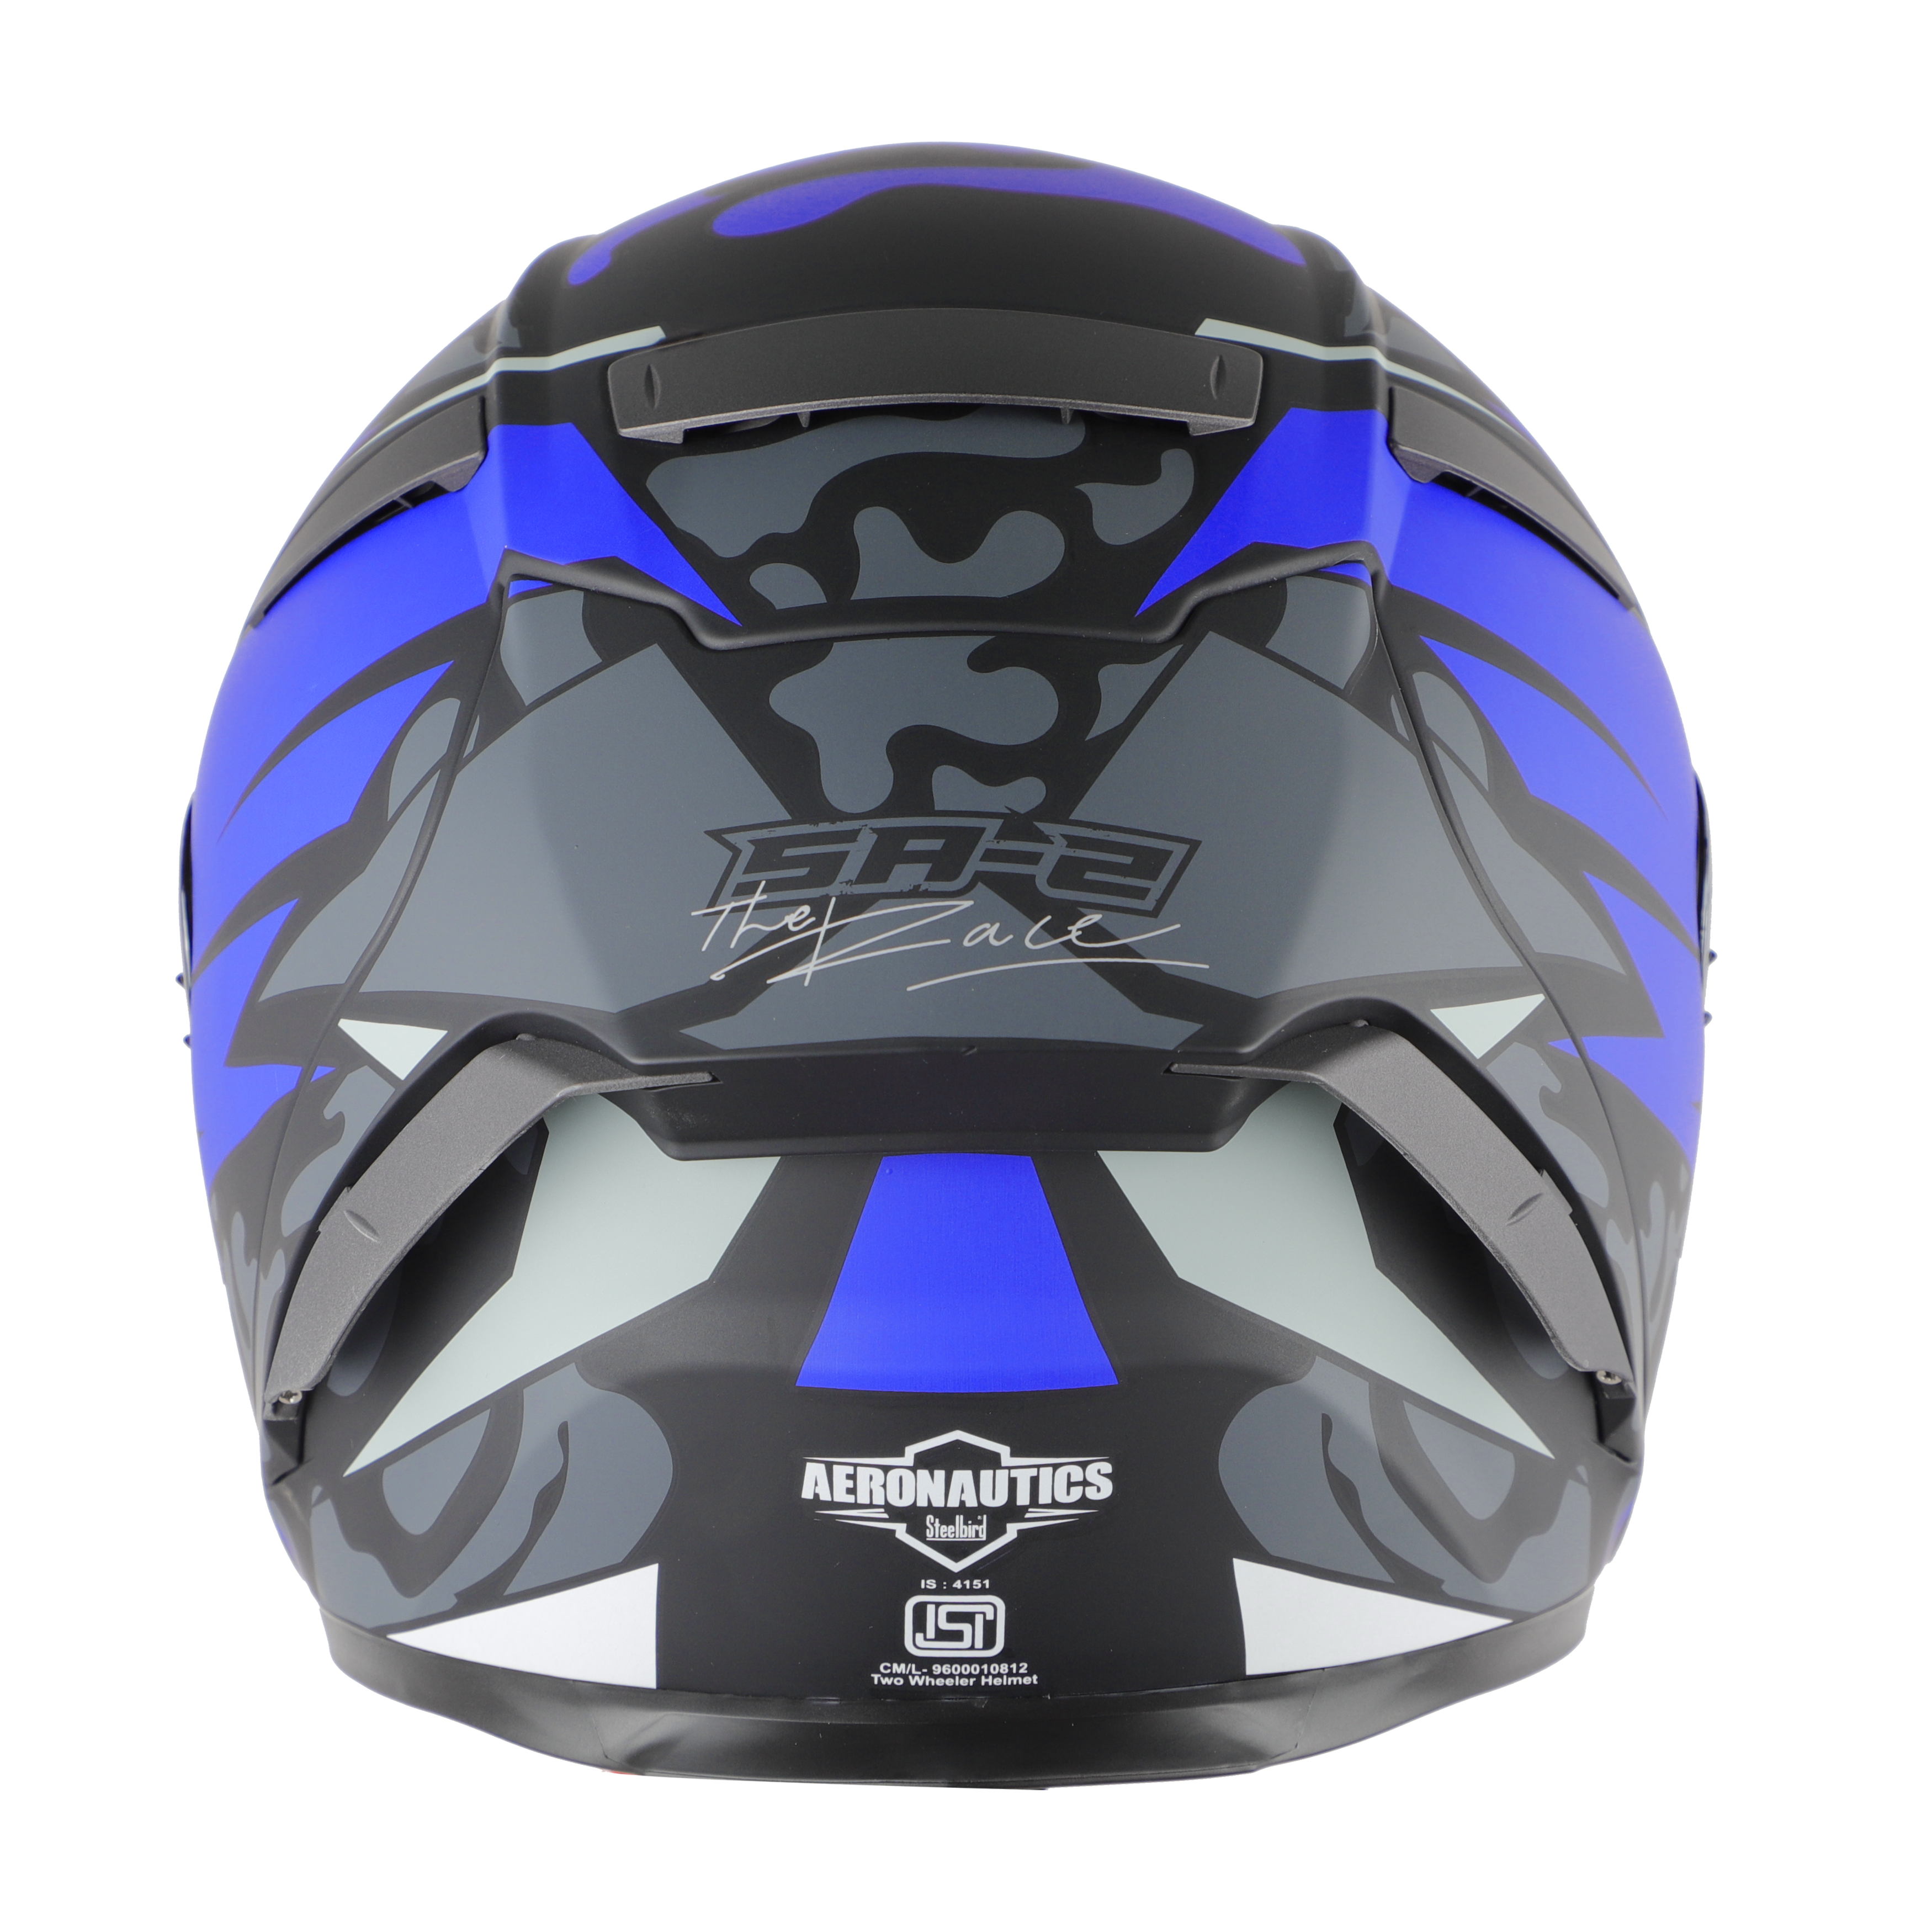 SA-2 TERMINATOR 3.0 GLOSSY BLACK WITH BLUE FITTED WITH CLEAR VISOR EXTRA SILVER CHROME VISOR FREE (WITH ANTI-FOR SHIELD HOLDER)